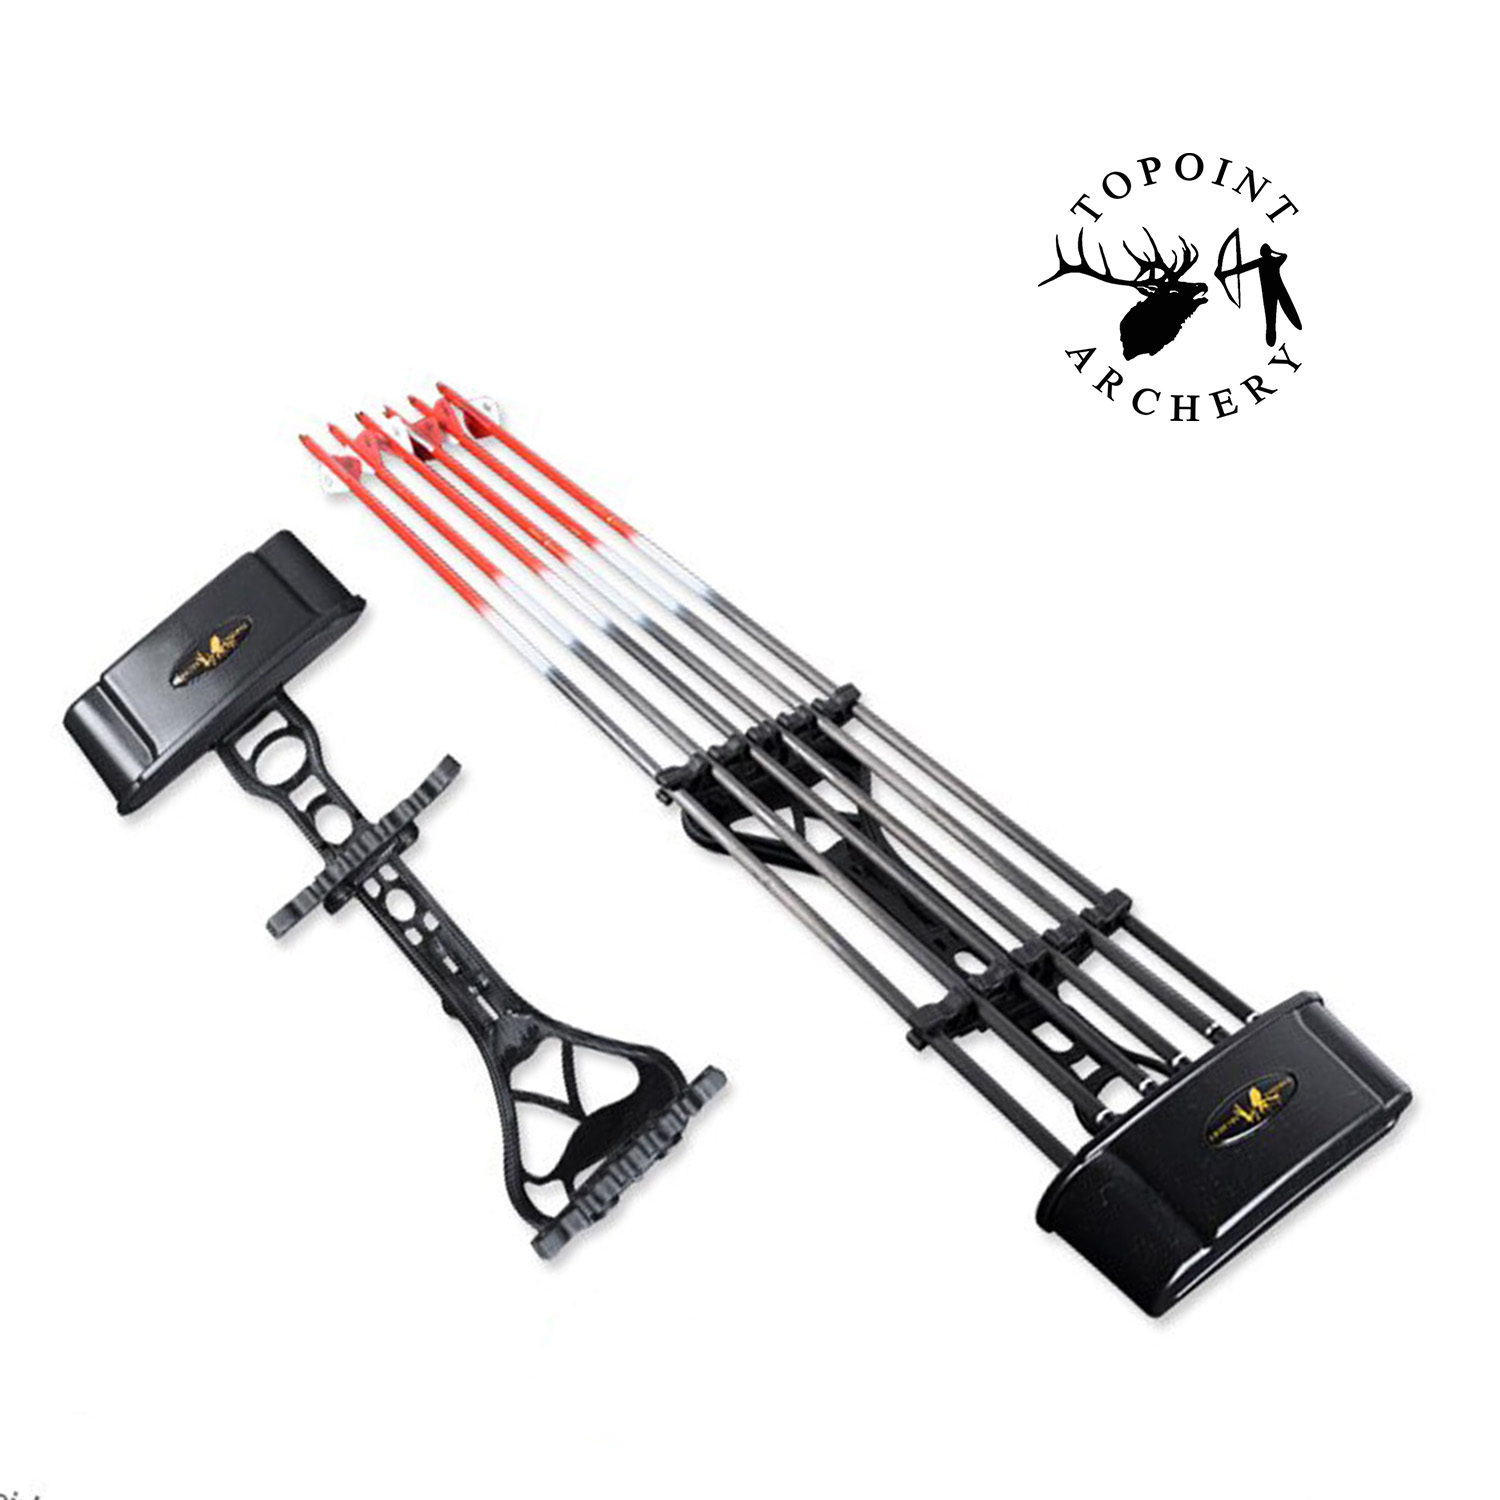 TP726 Arrow Quiver Hold 6Pcs Arrow Fully Adjust for Compound /Recurve Bow Archery Hunting Shooting